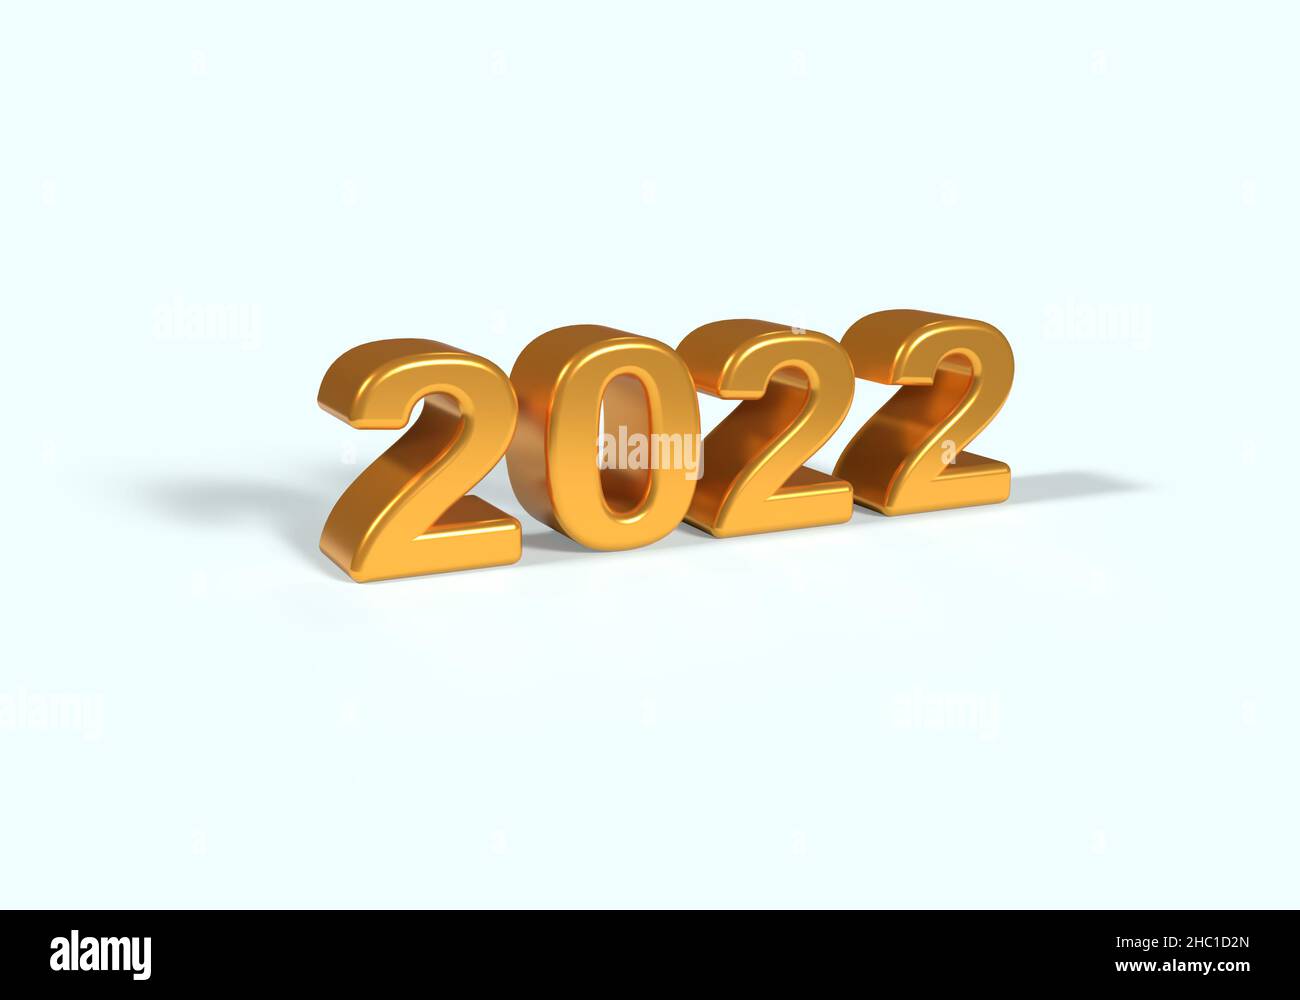 Metalic Gold 2022 new year 3d render illustration isolated on white background, Perspective View. Stock Photo